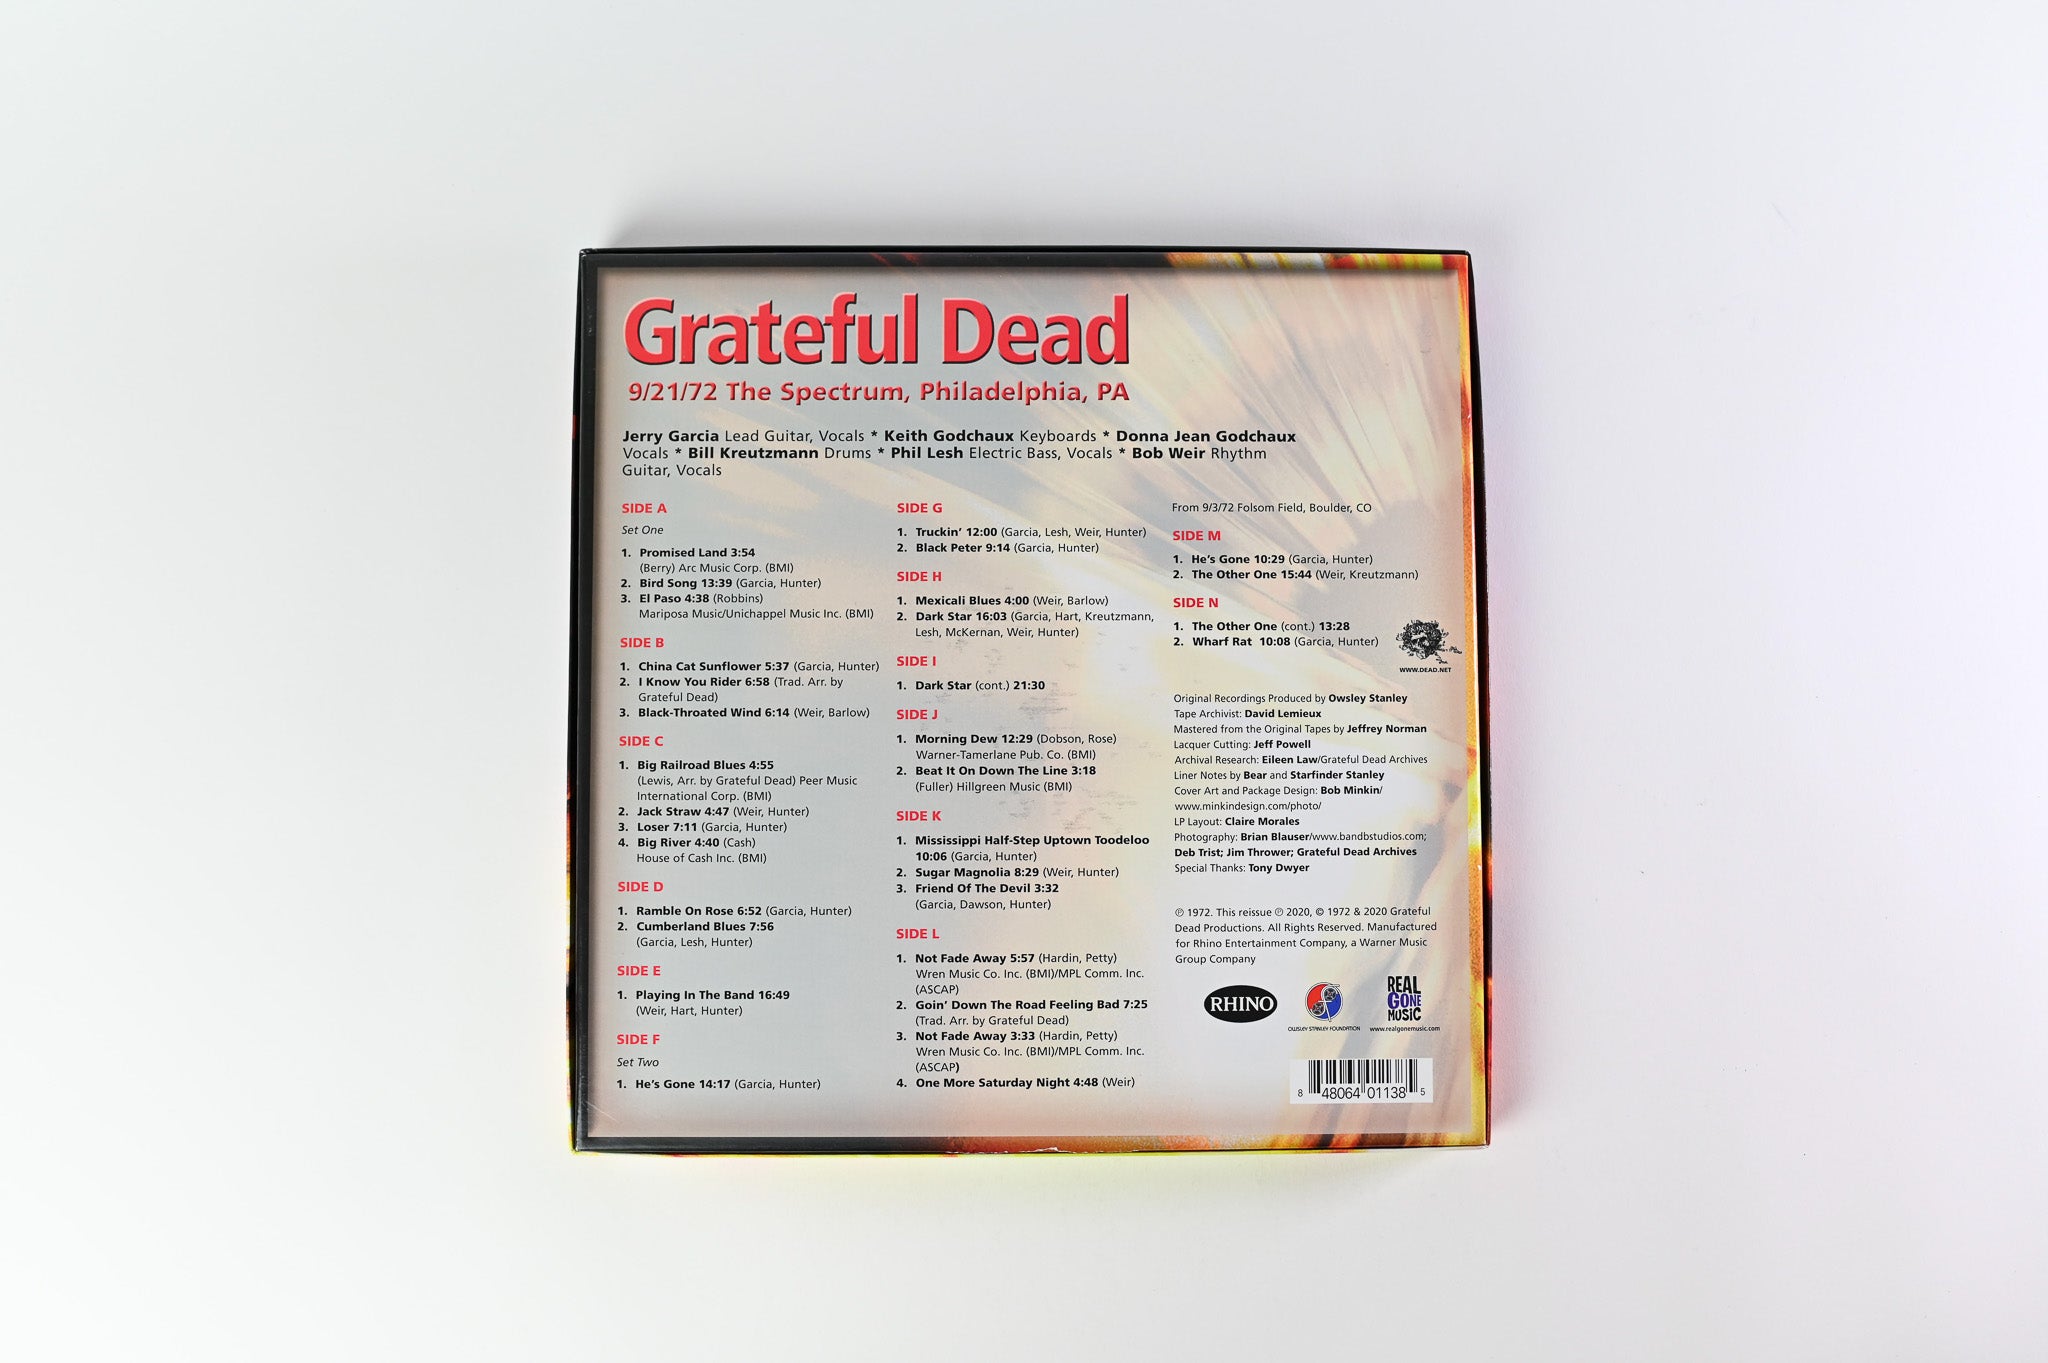 The Grateful Dead - Dick's Picks 36: 9/21/72 The Spectrum, Philadelphia, PA Limited Edition Numbered Box Set